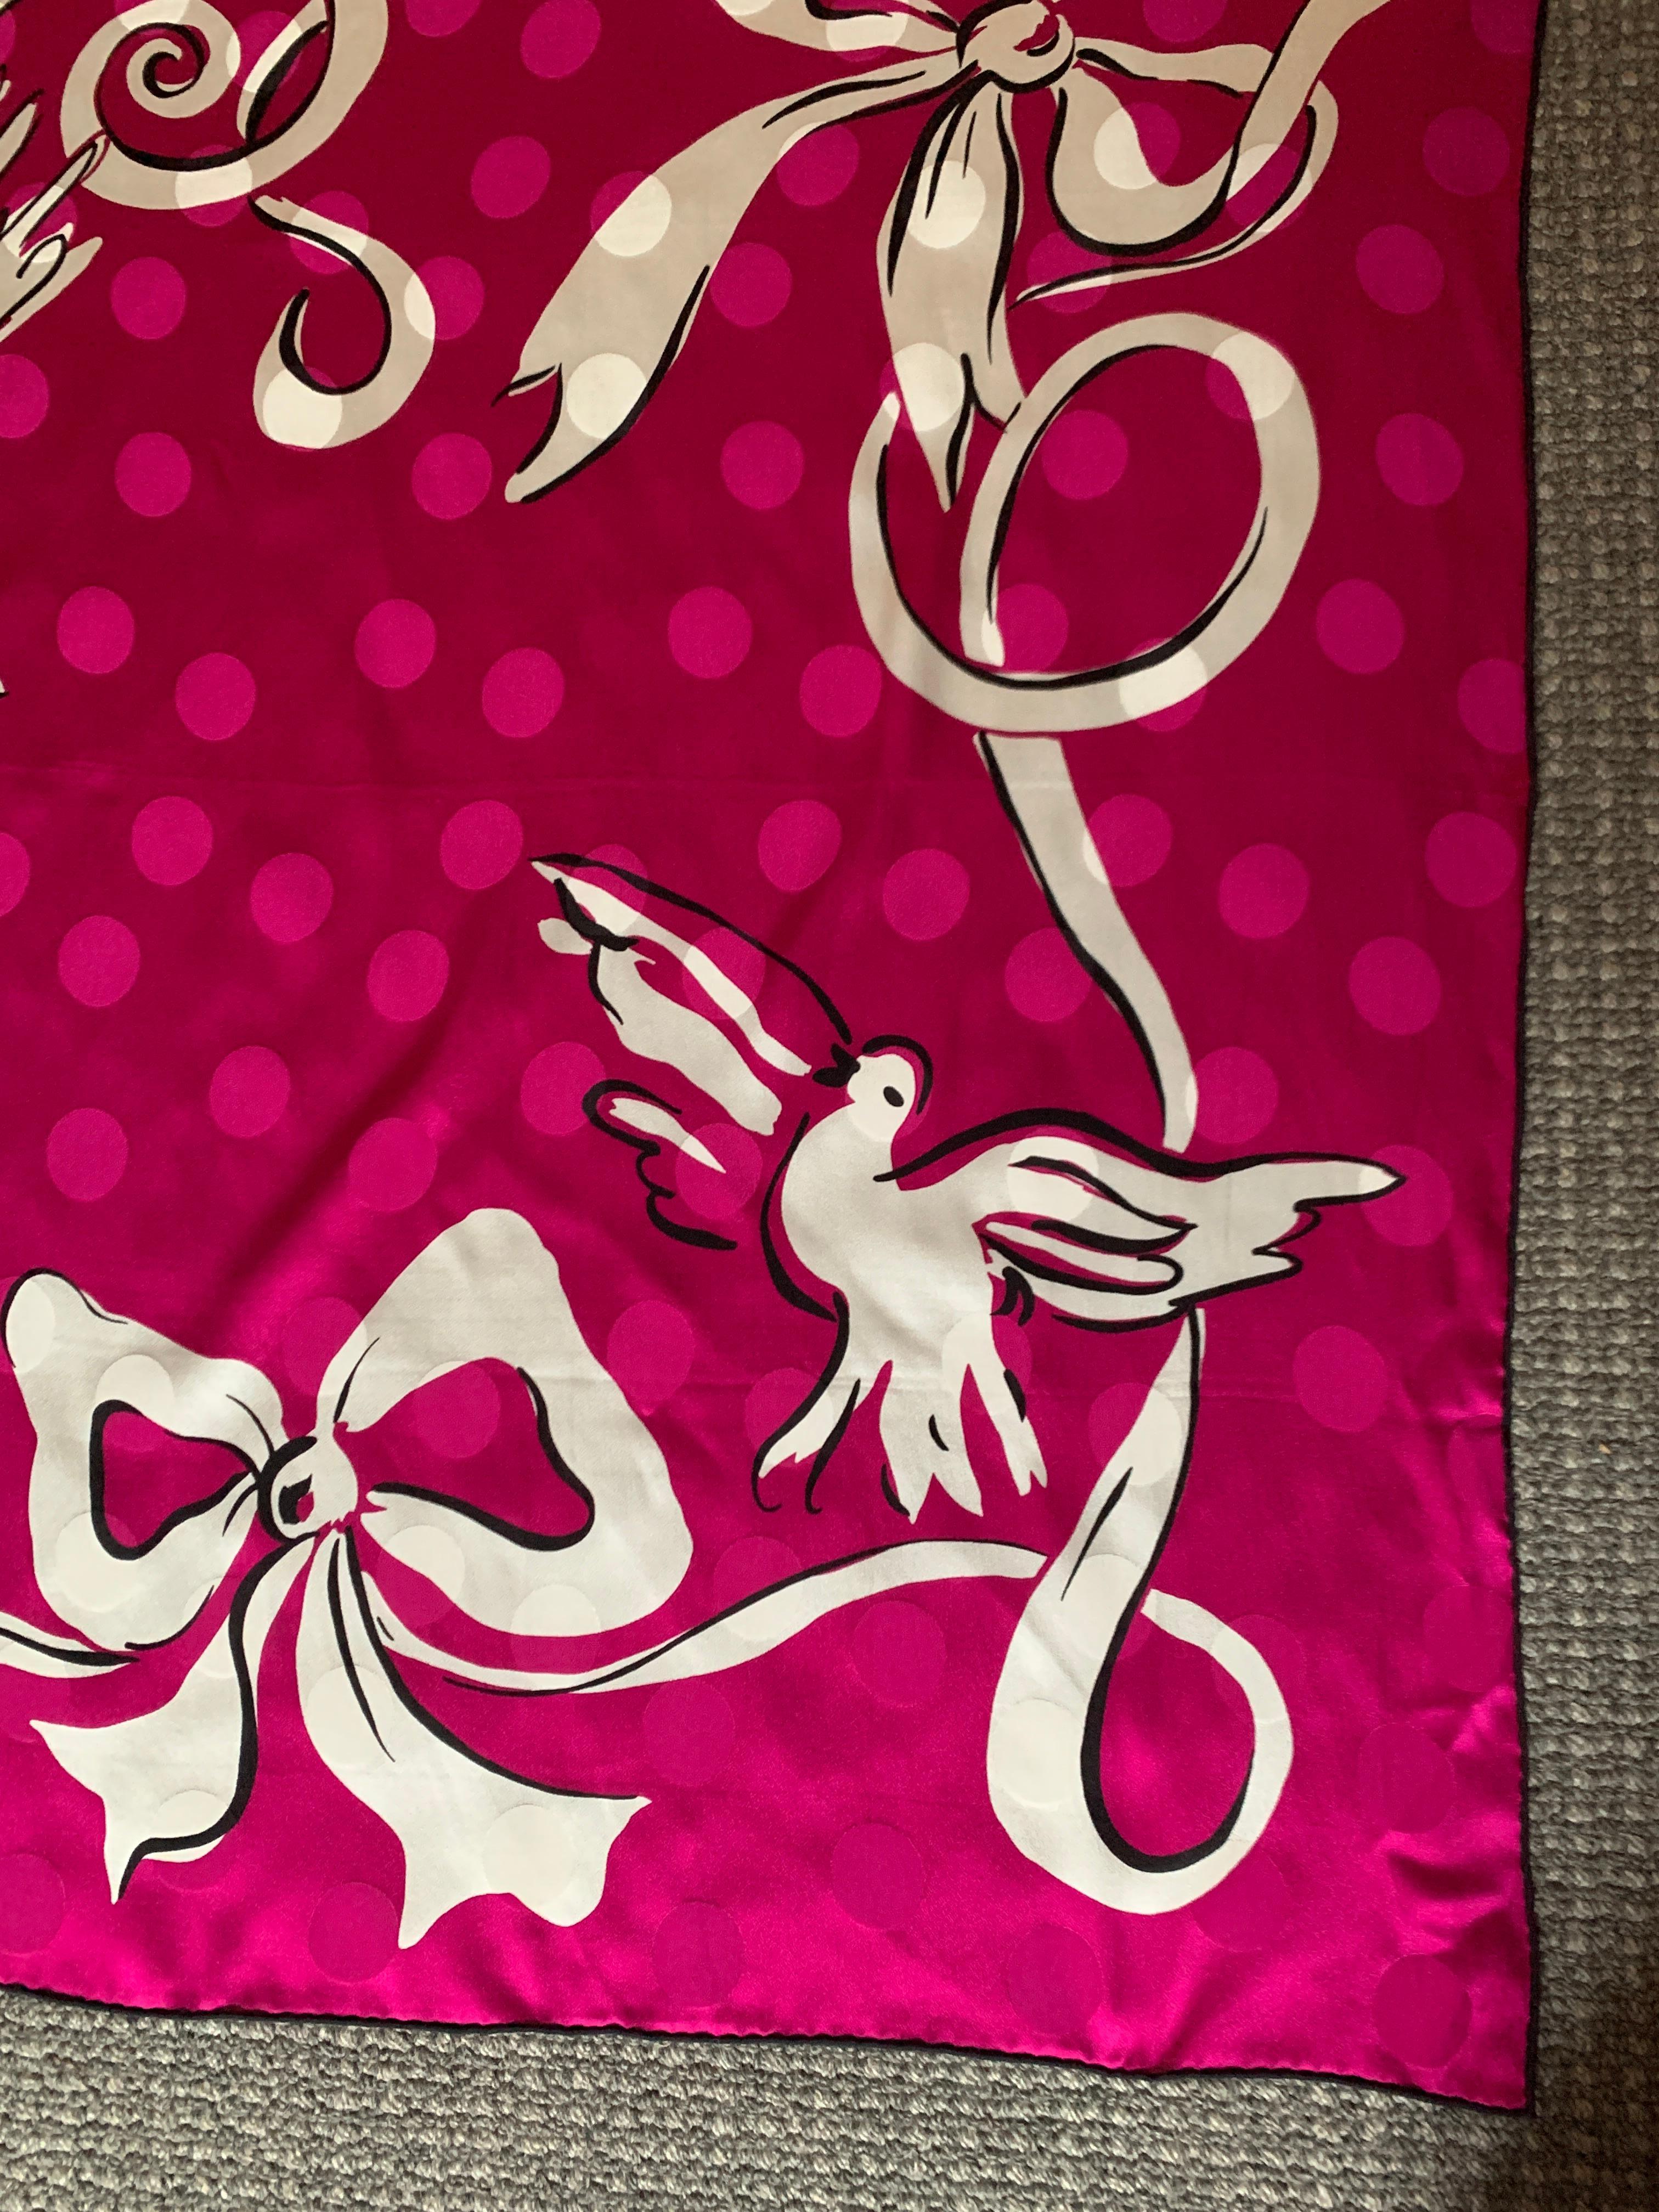 Women's Yves Saint Laurent Vintage Silk Scarf in Fuchsia Pink Dove and Ribbon Print